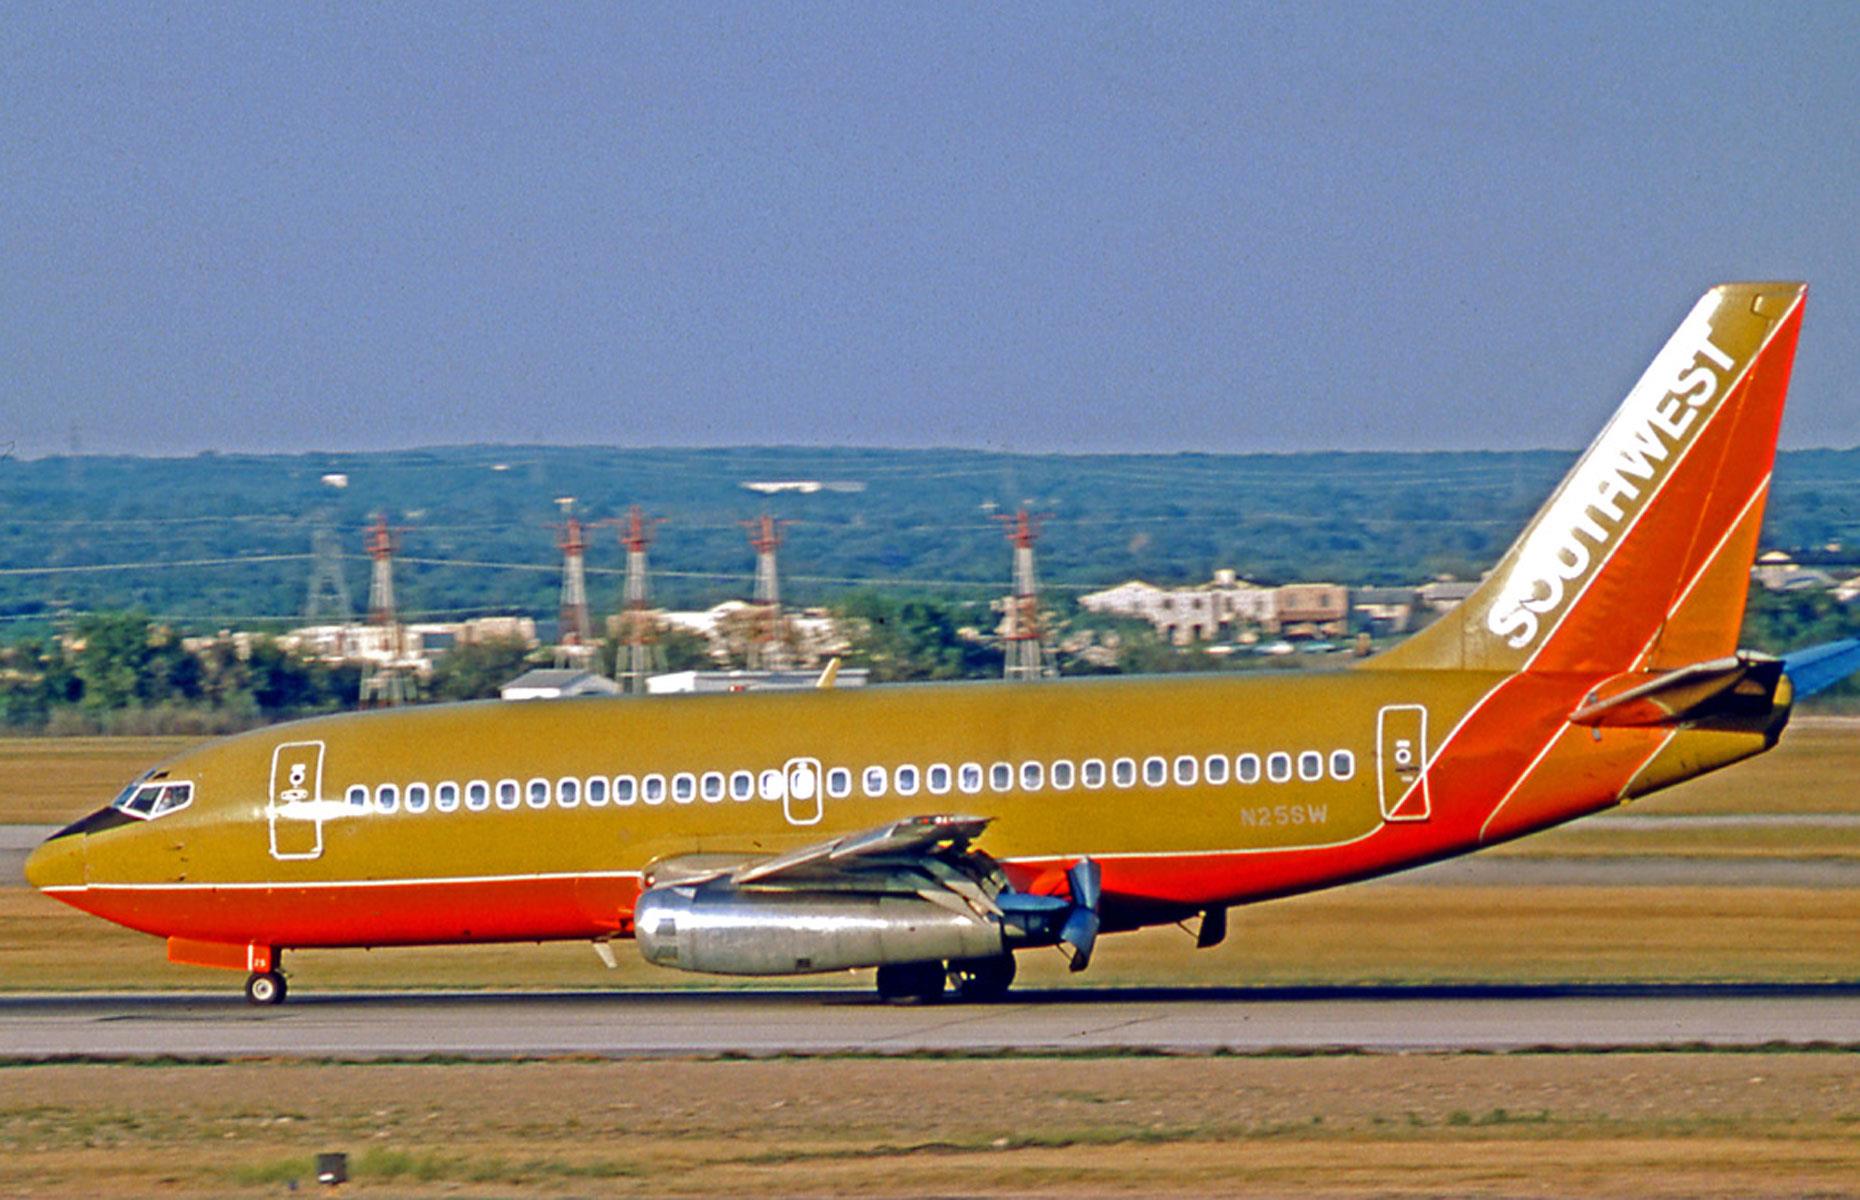 Southwest started as a strictly Texas-only airline